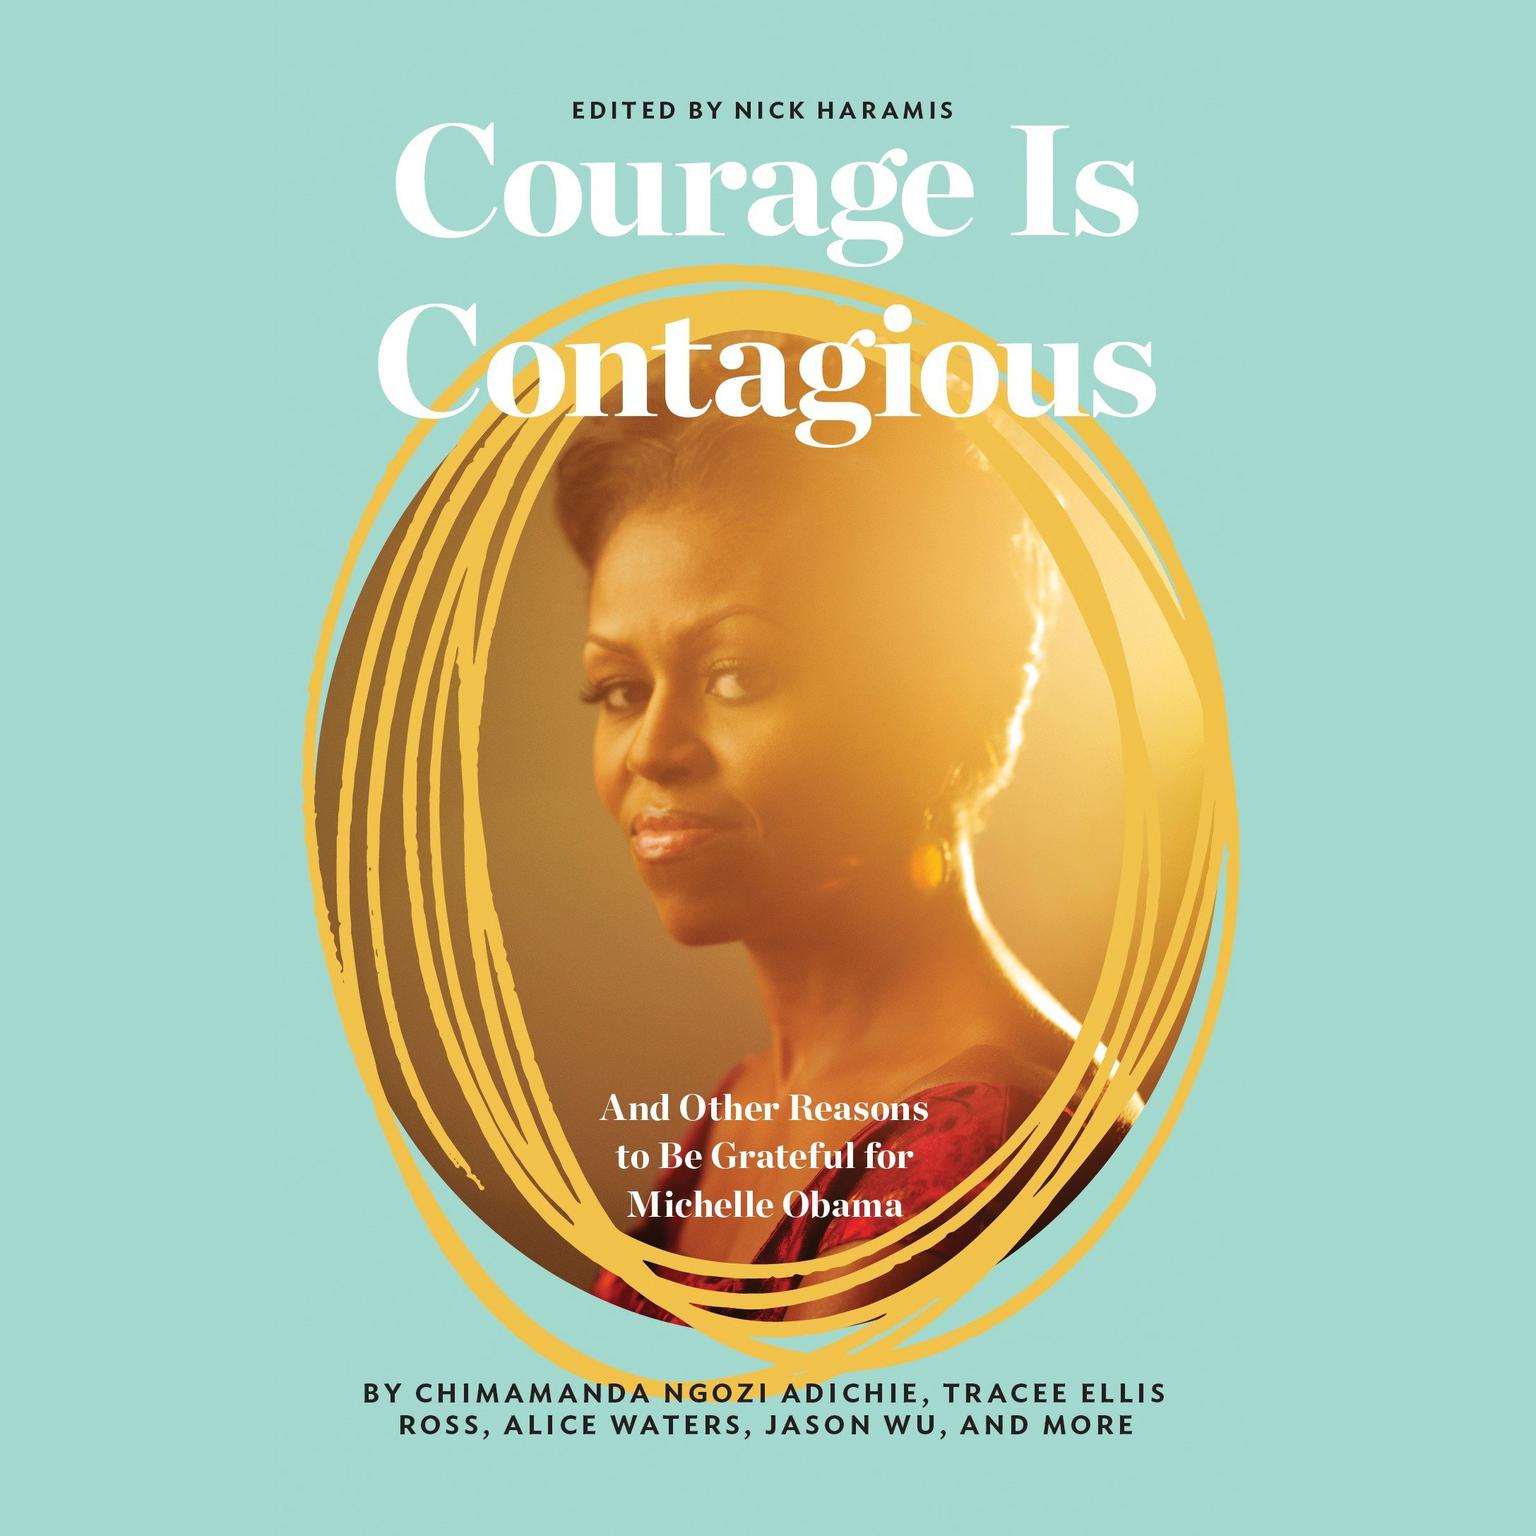 Courage Is Contagious: And Other Reasons to Be Grateful for Michelle Obama Audiobook, by Nick Haramis